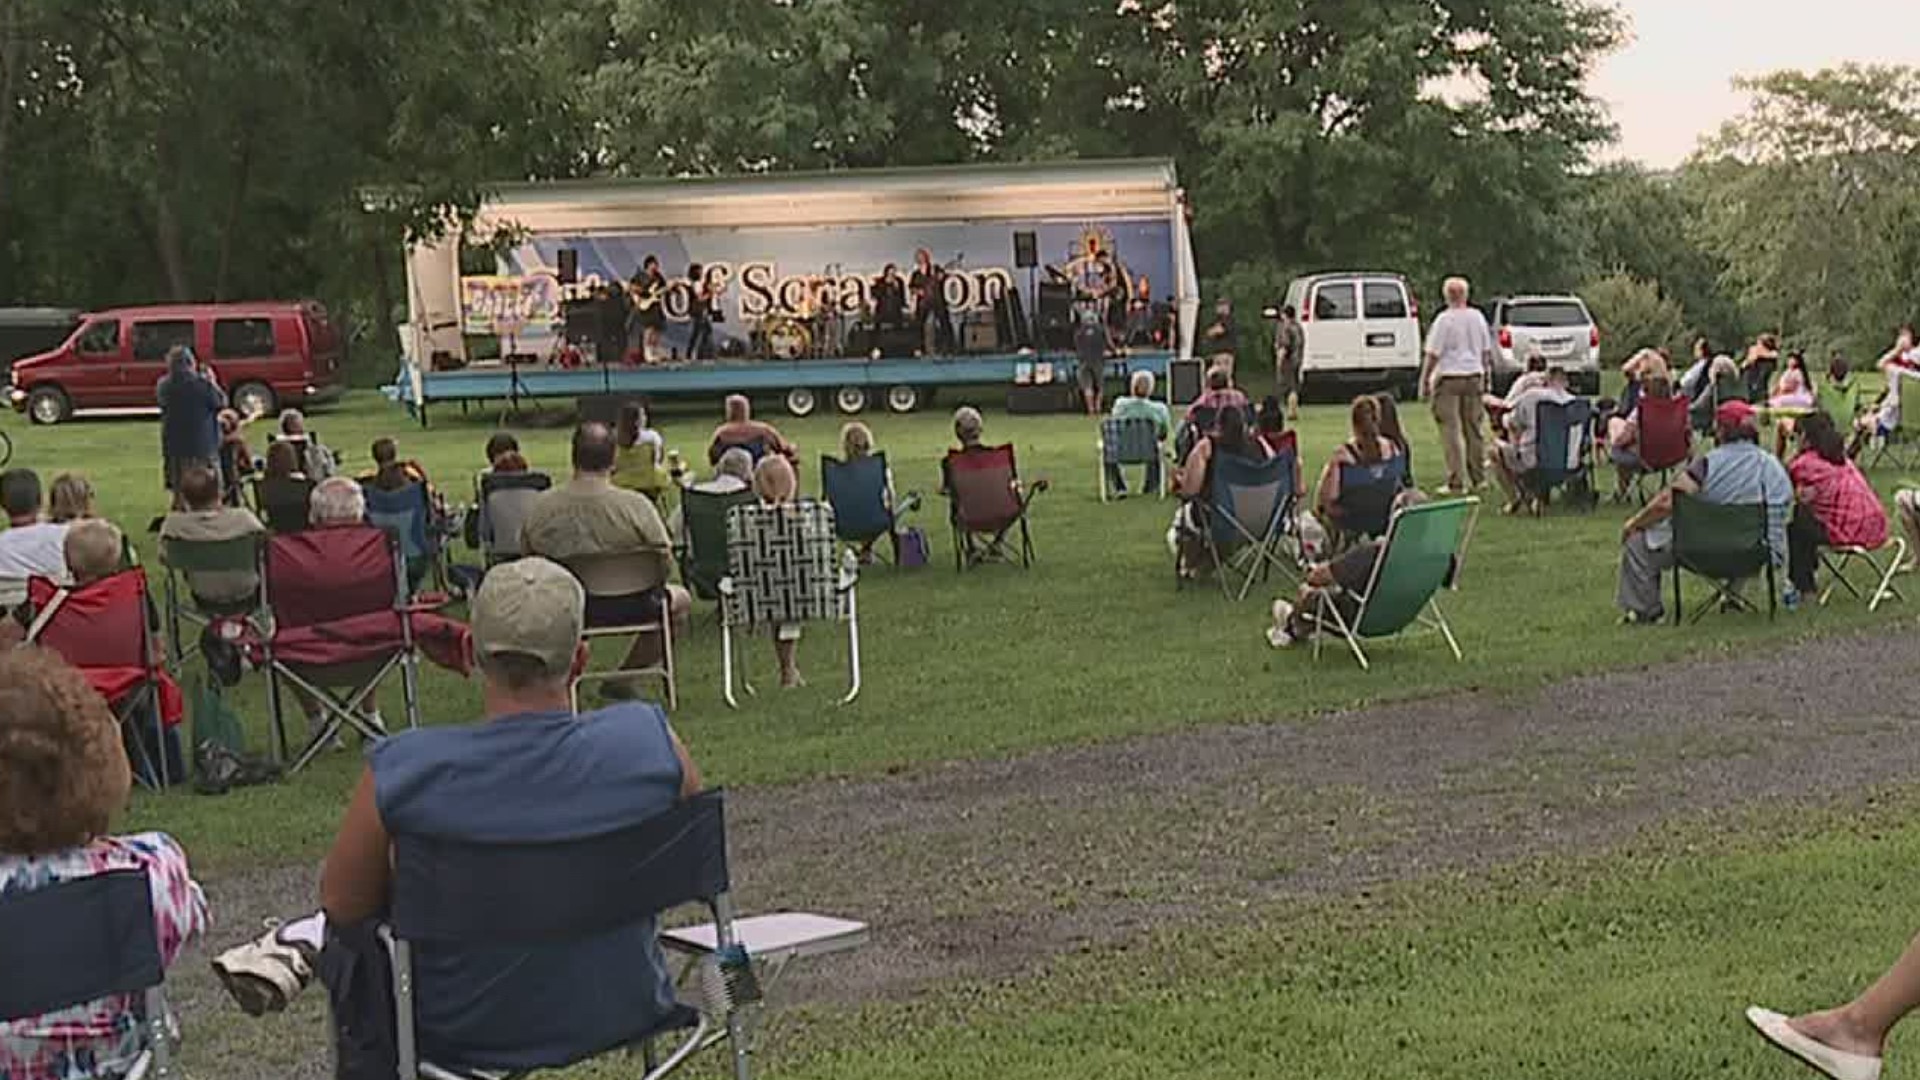 You can now enjoy live music for two days a week at a park in Scranton.